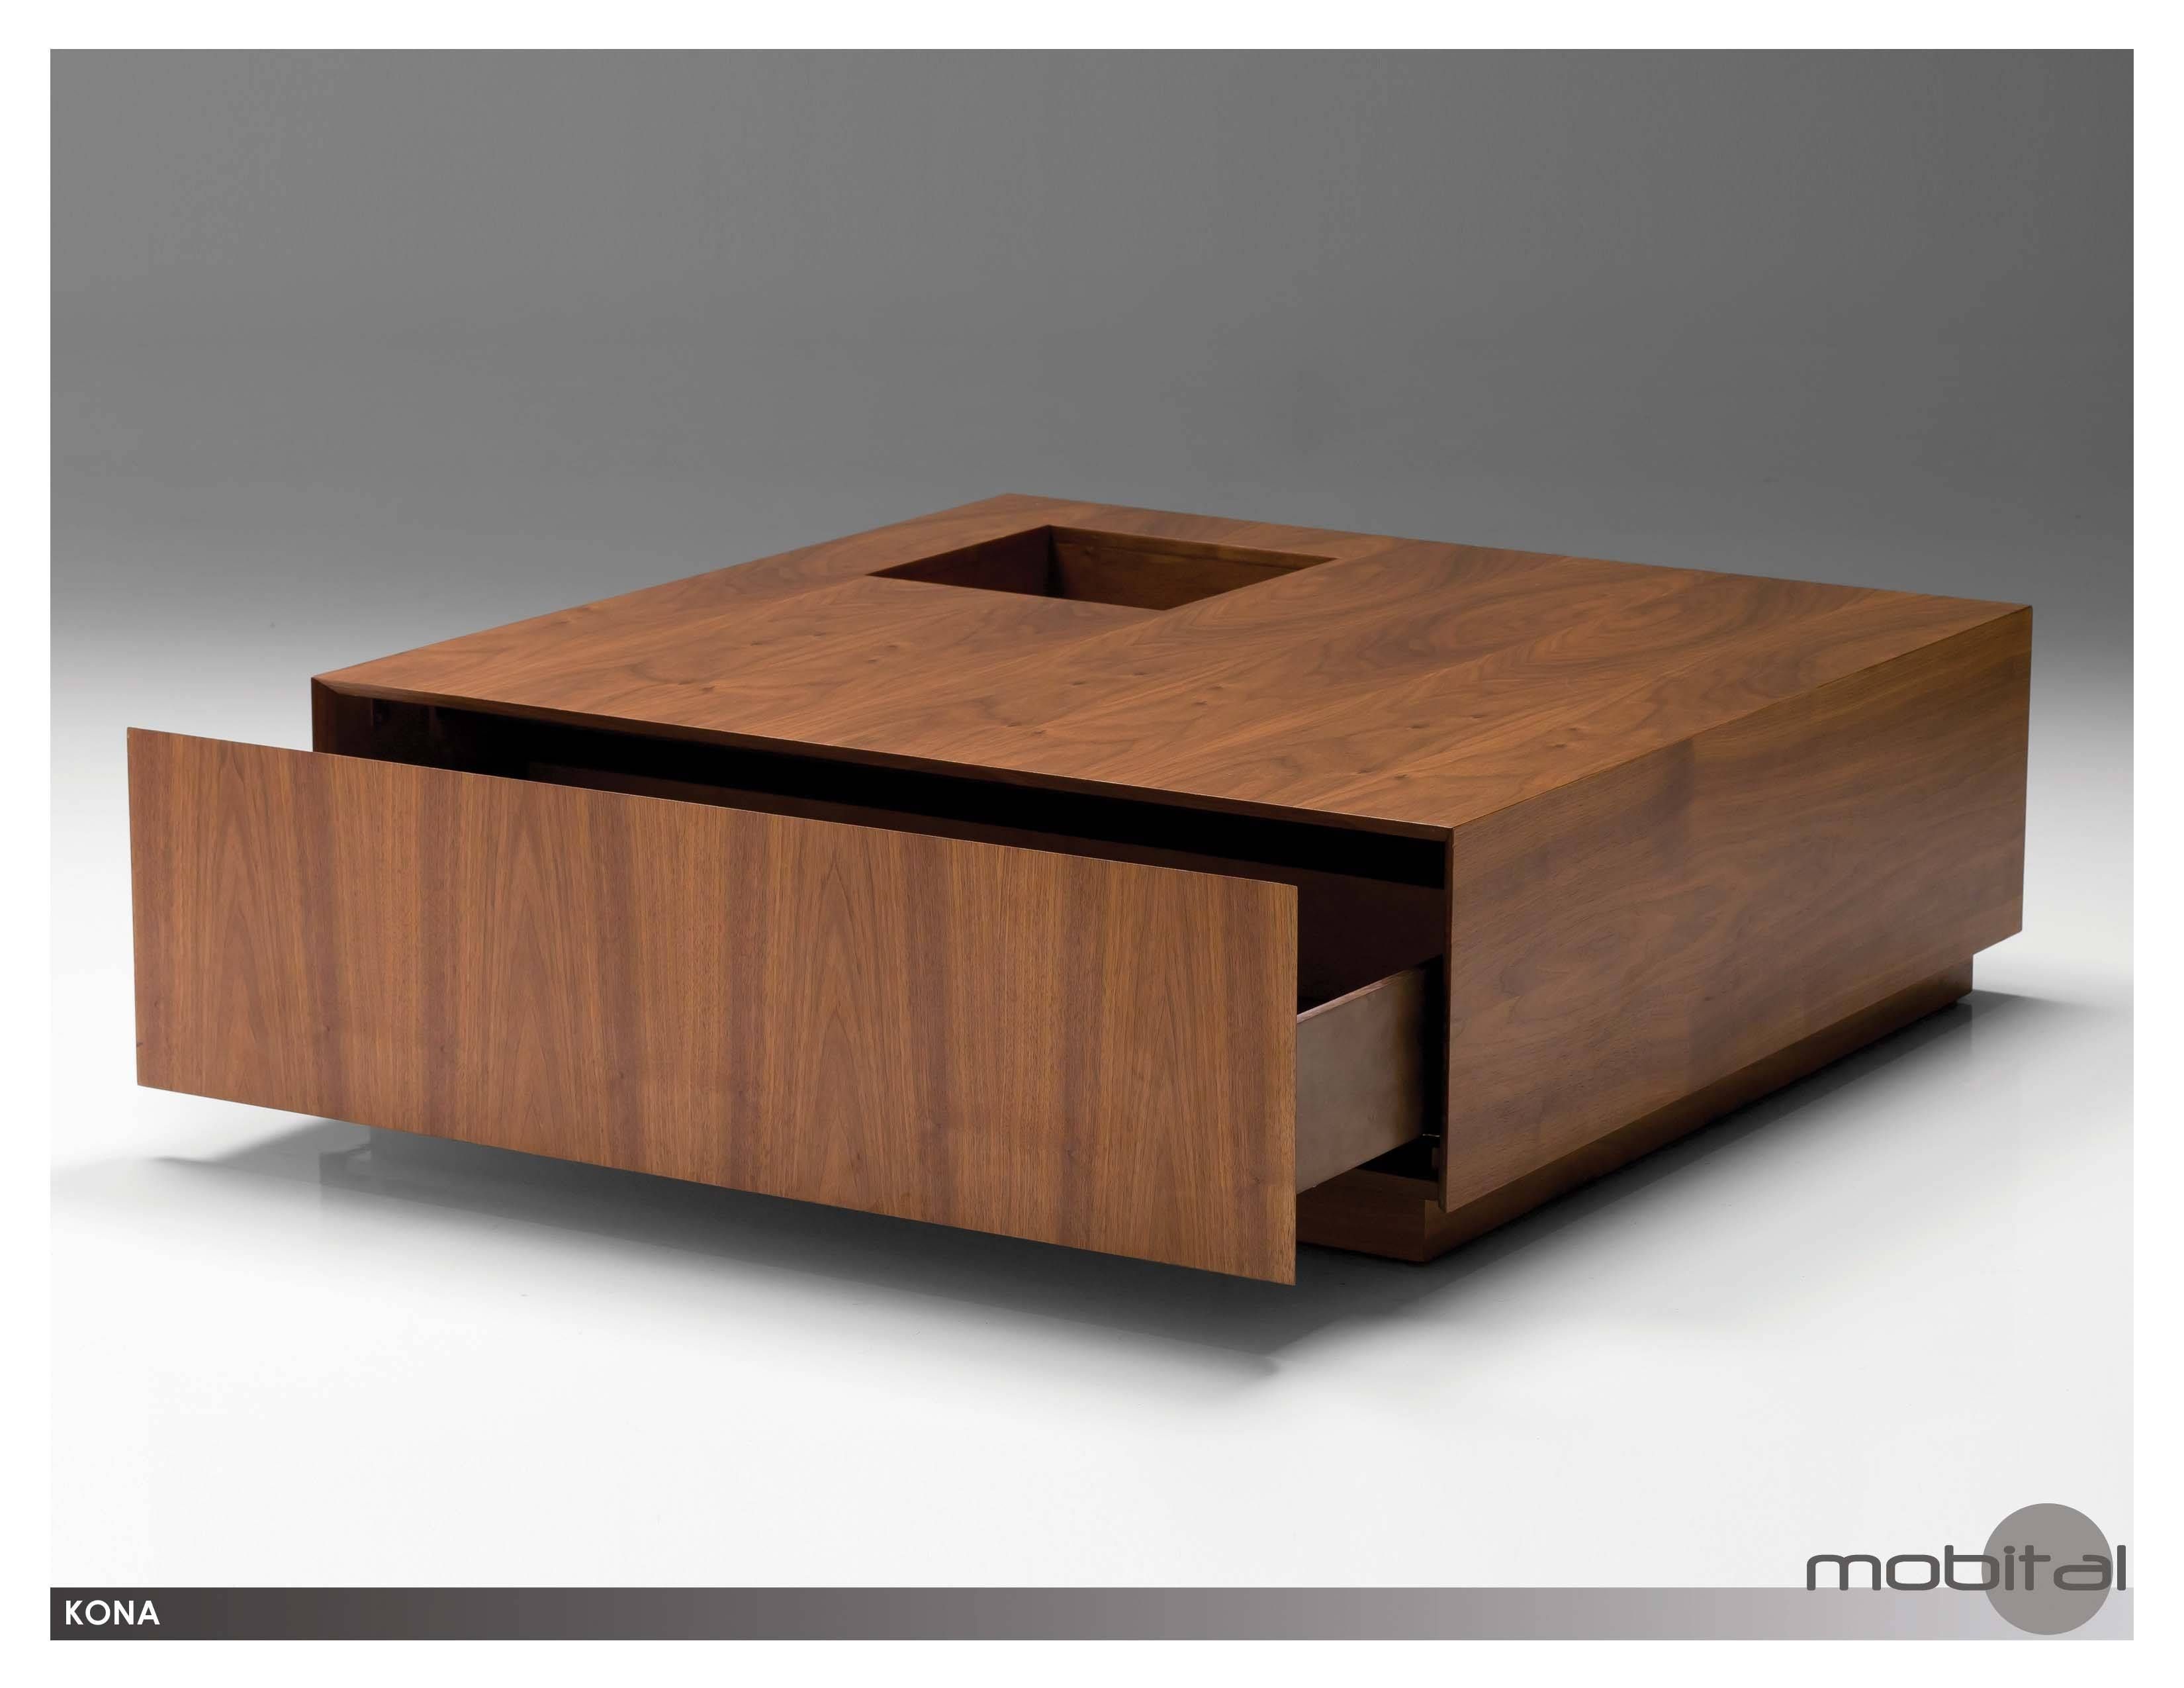 Coffee Table: Amusing Square Coffee Table With Storage Designs Throughout Square Wood Coffee Tables With Storage (View 7 of 30)